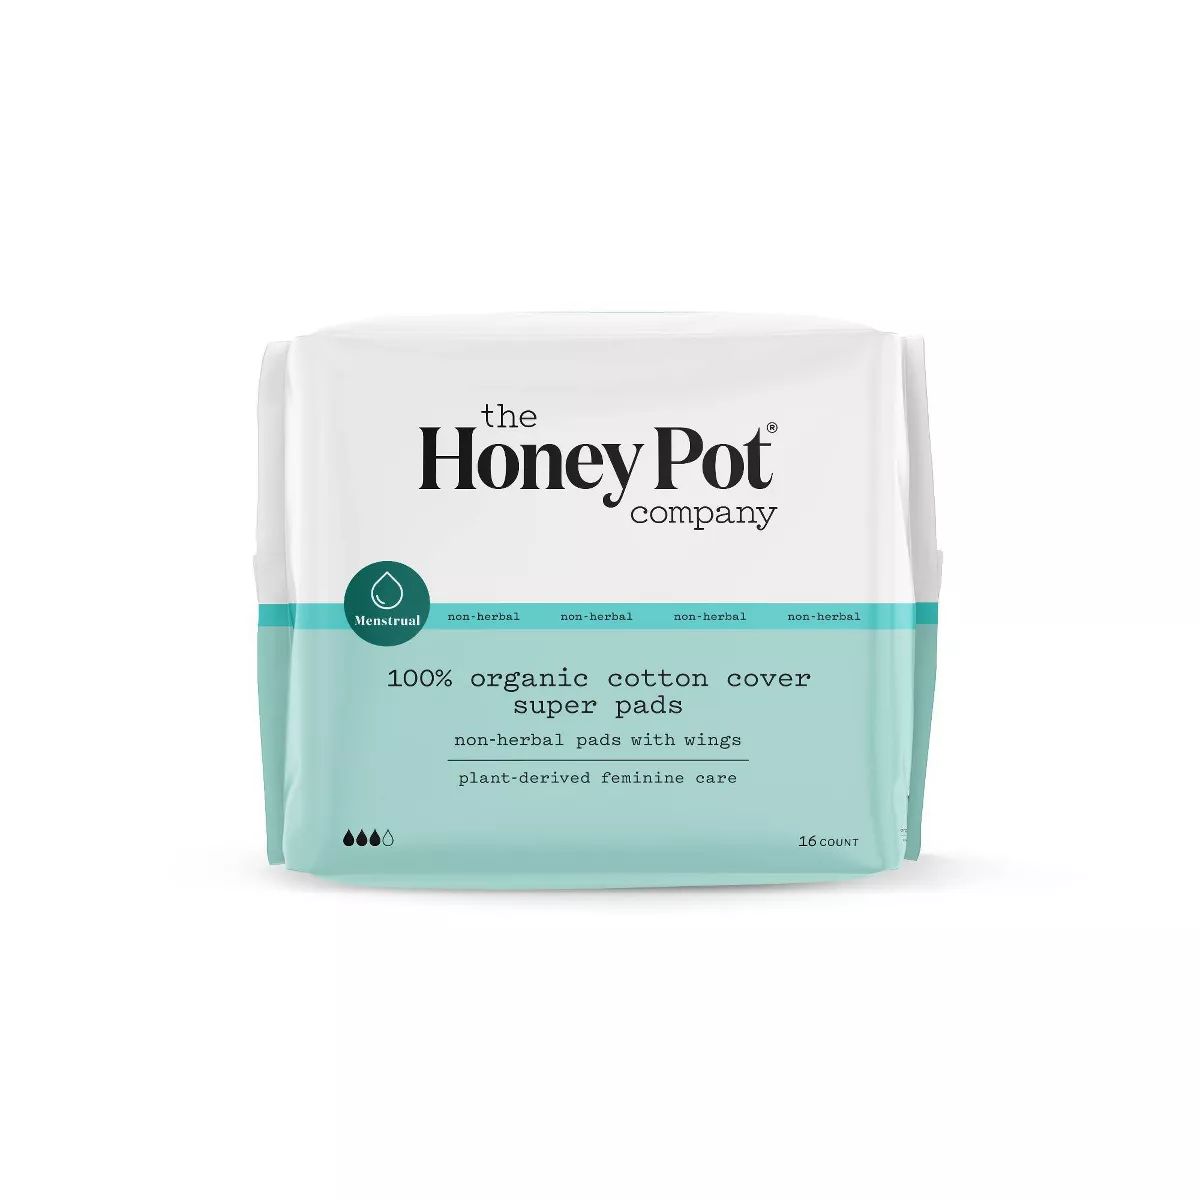 The Honey Pot Company Non-Herbal Super Pads with Wings, Organic Cotton Cover - 16ct | Target